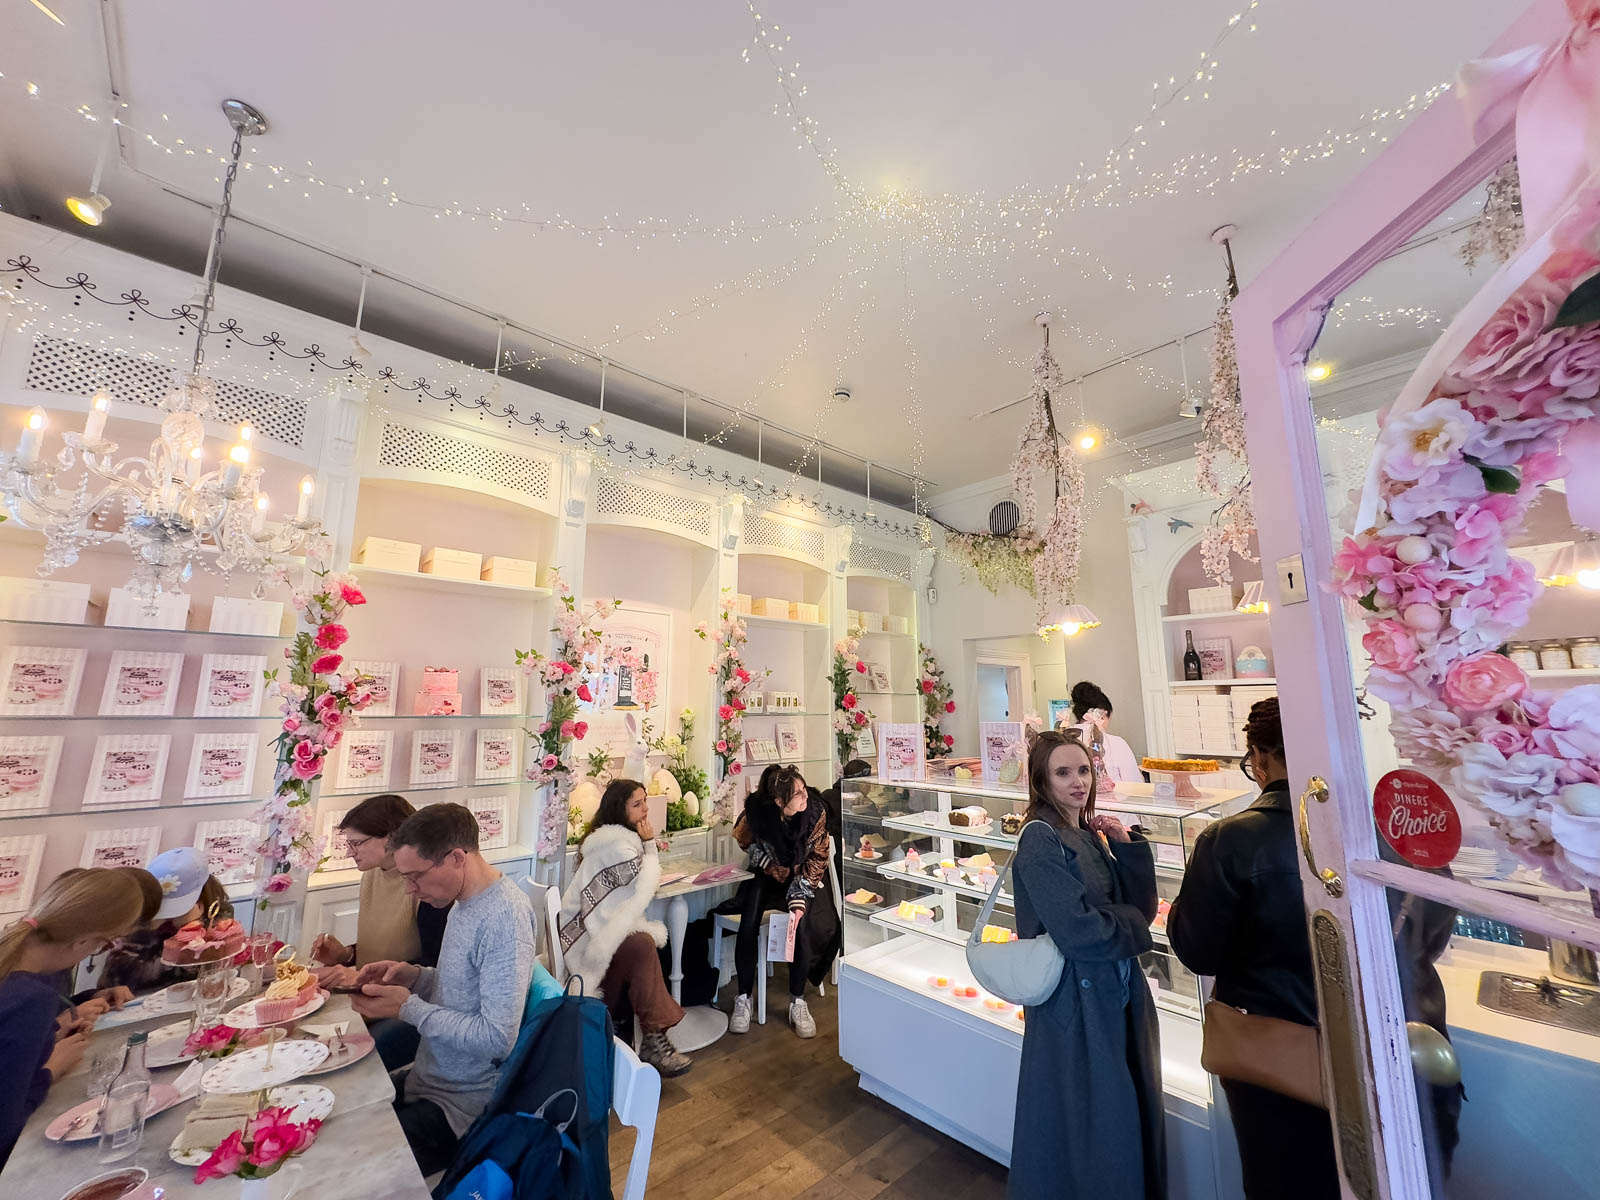 The Peggy Porschen's tea shop in London has twinkle lights on the ceiling and floral decor everywhere.